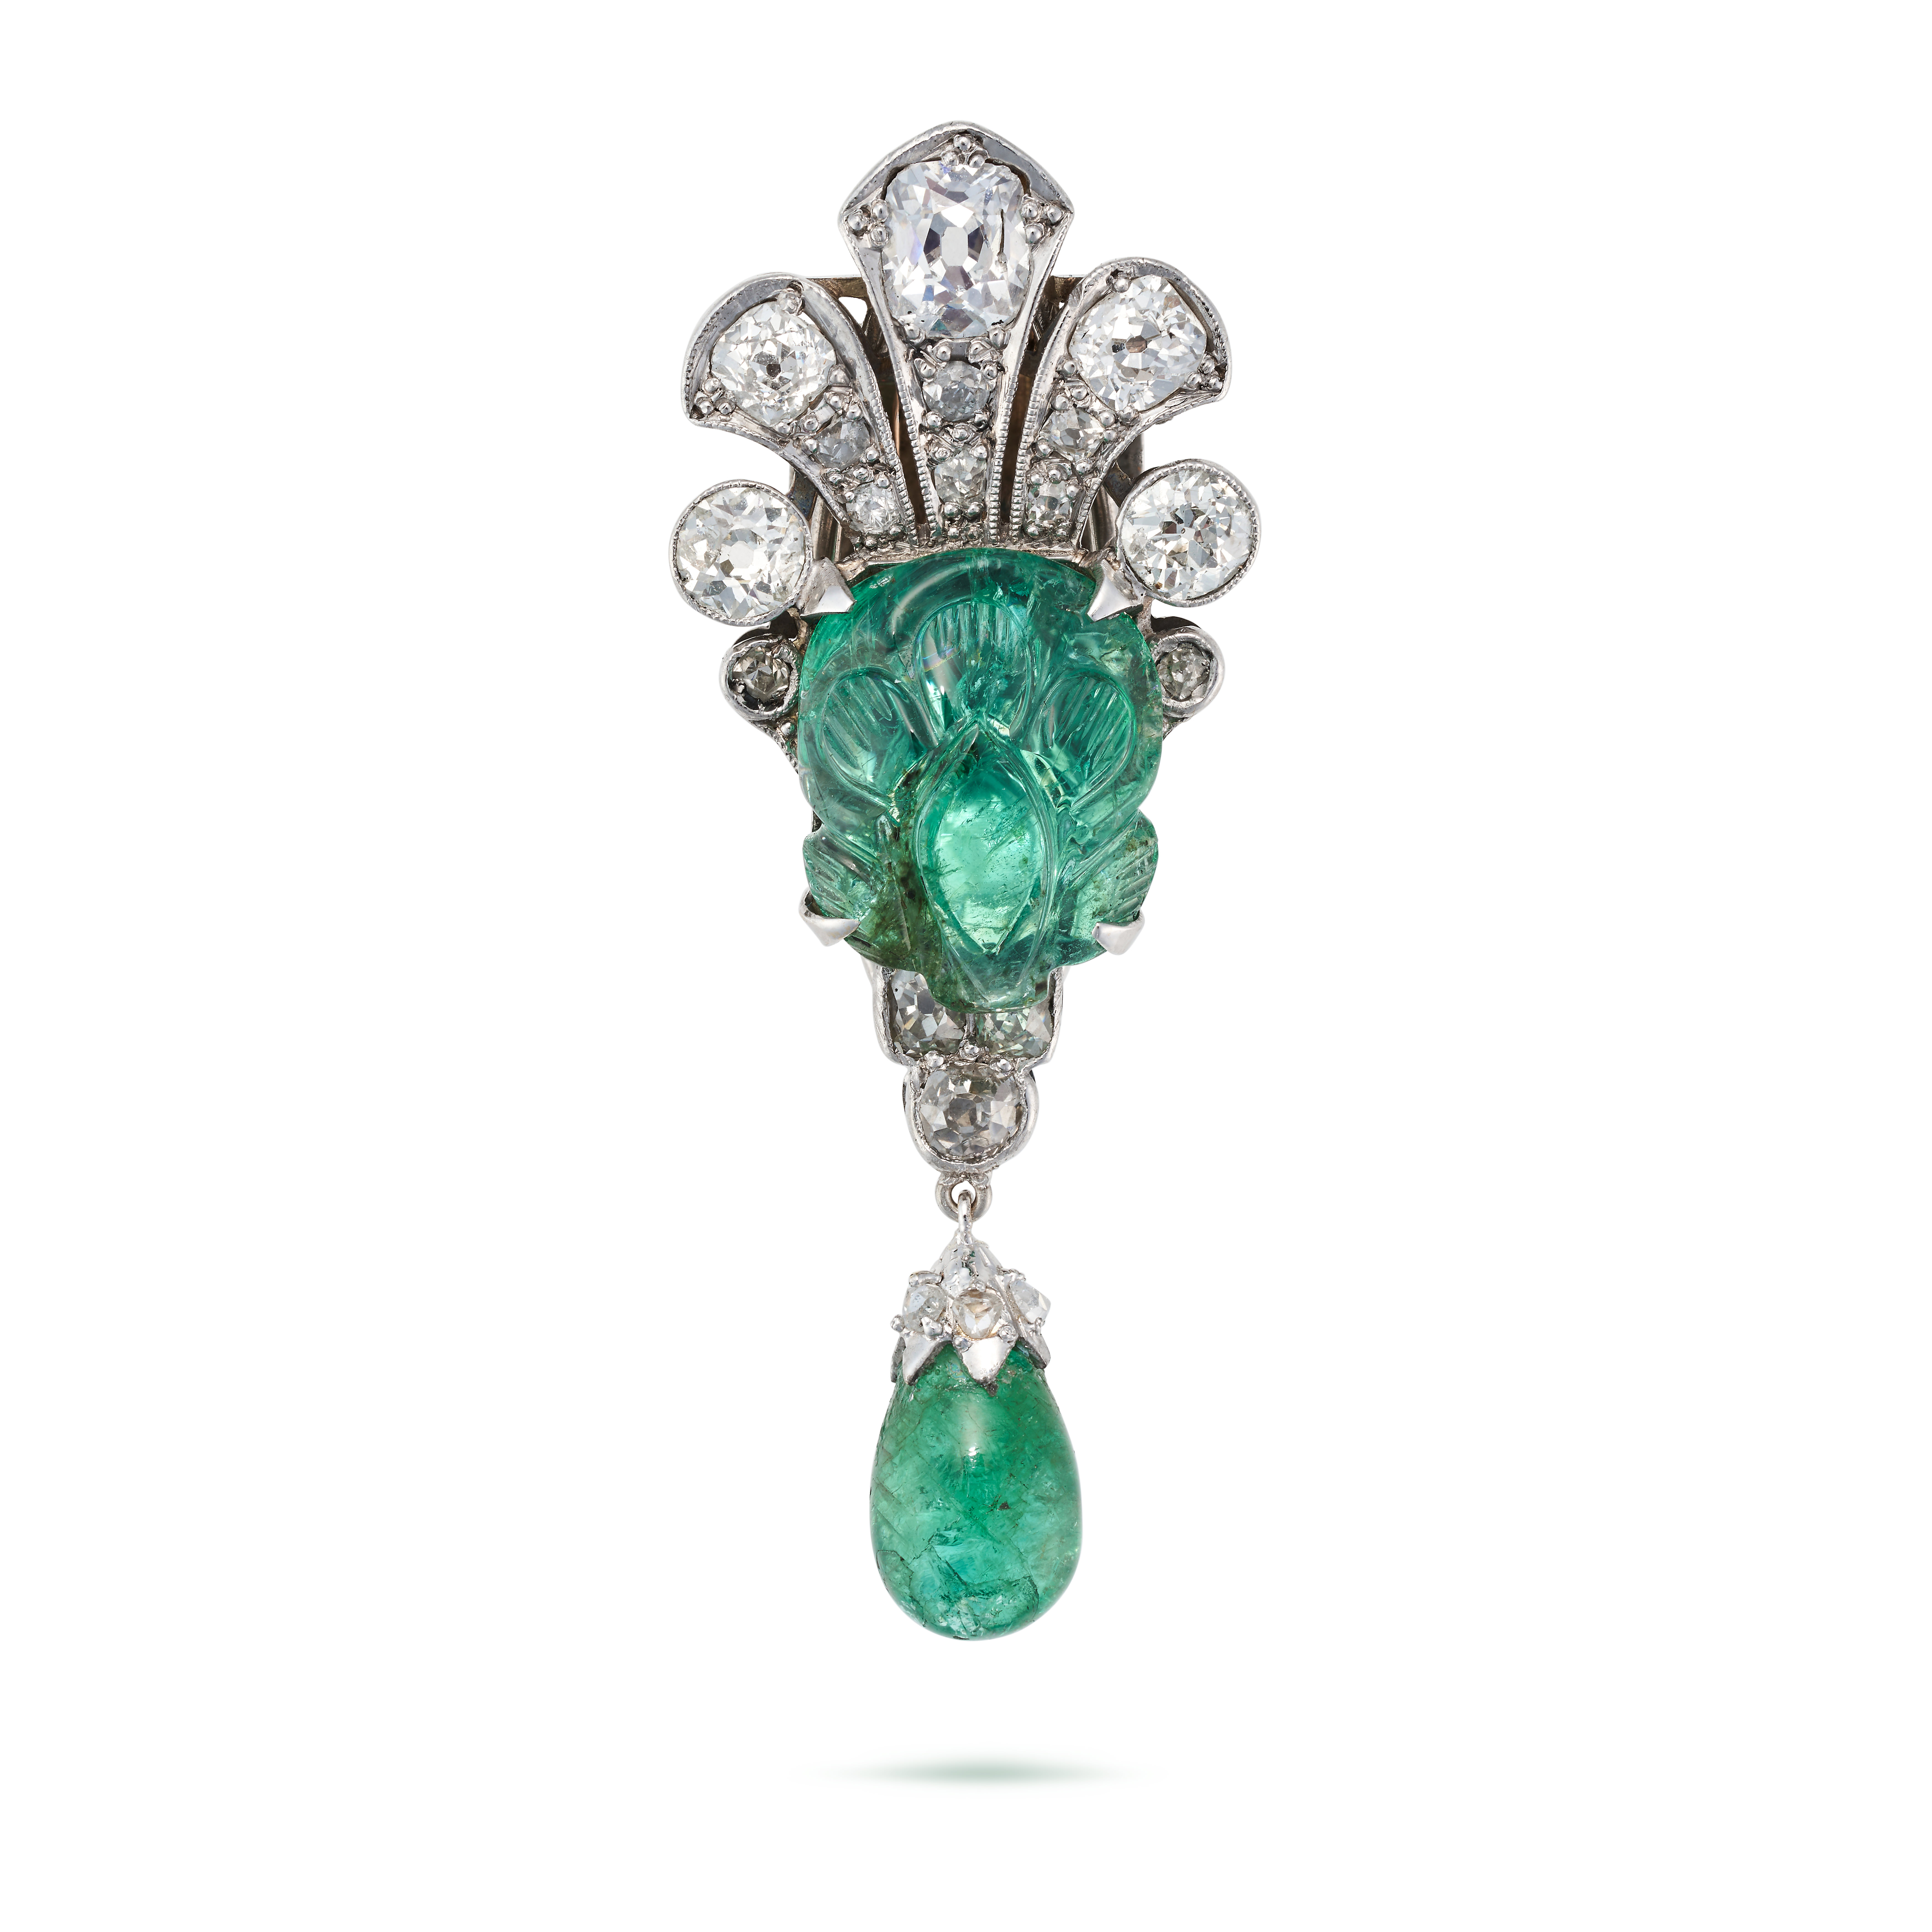 A MUGHAL CARVED EMERALD AND DIAMOND CLIP BROOCH set with a Mughal carved emerald accented by old ...